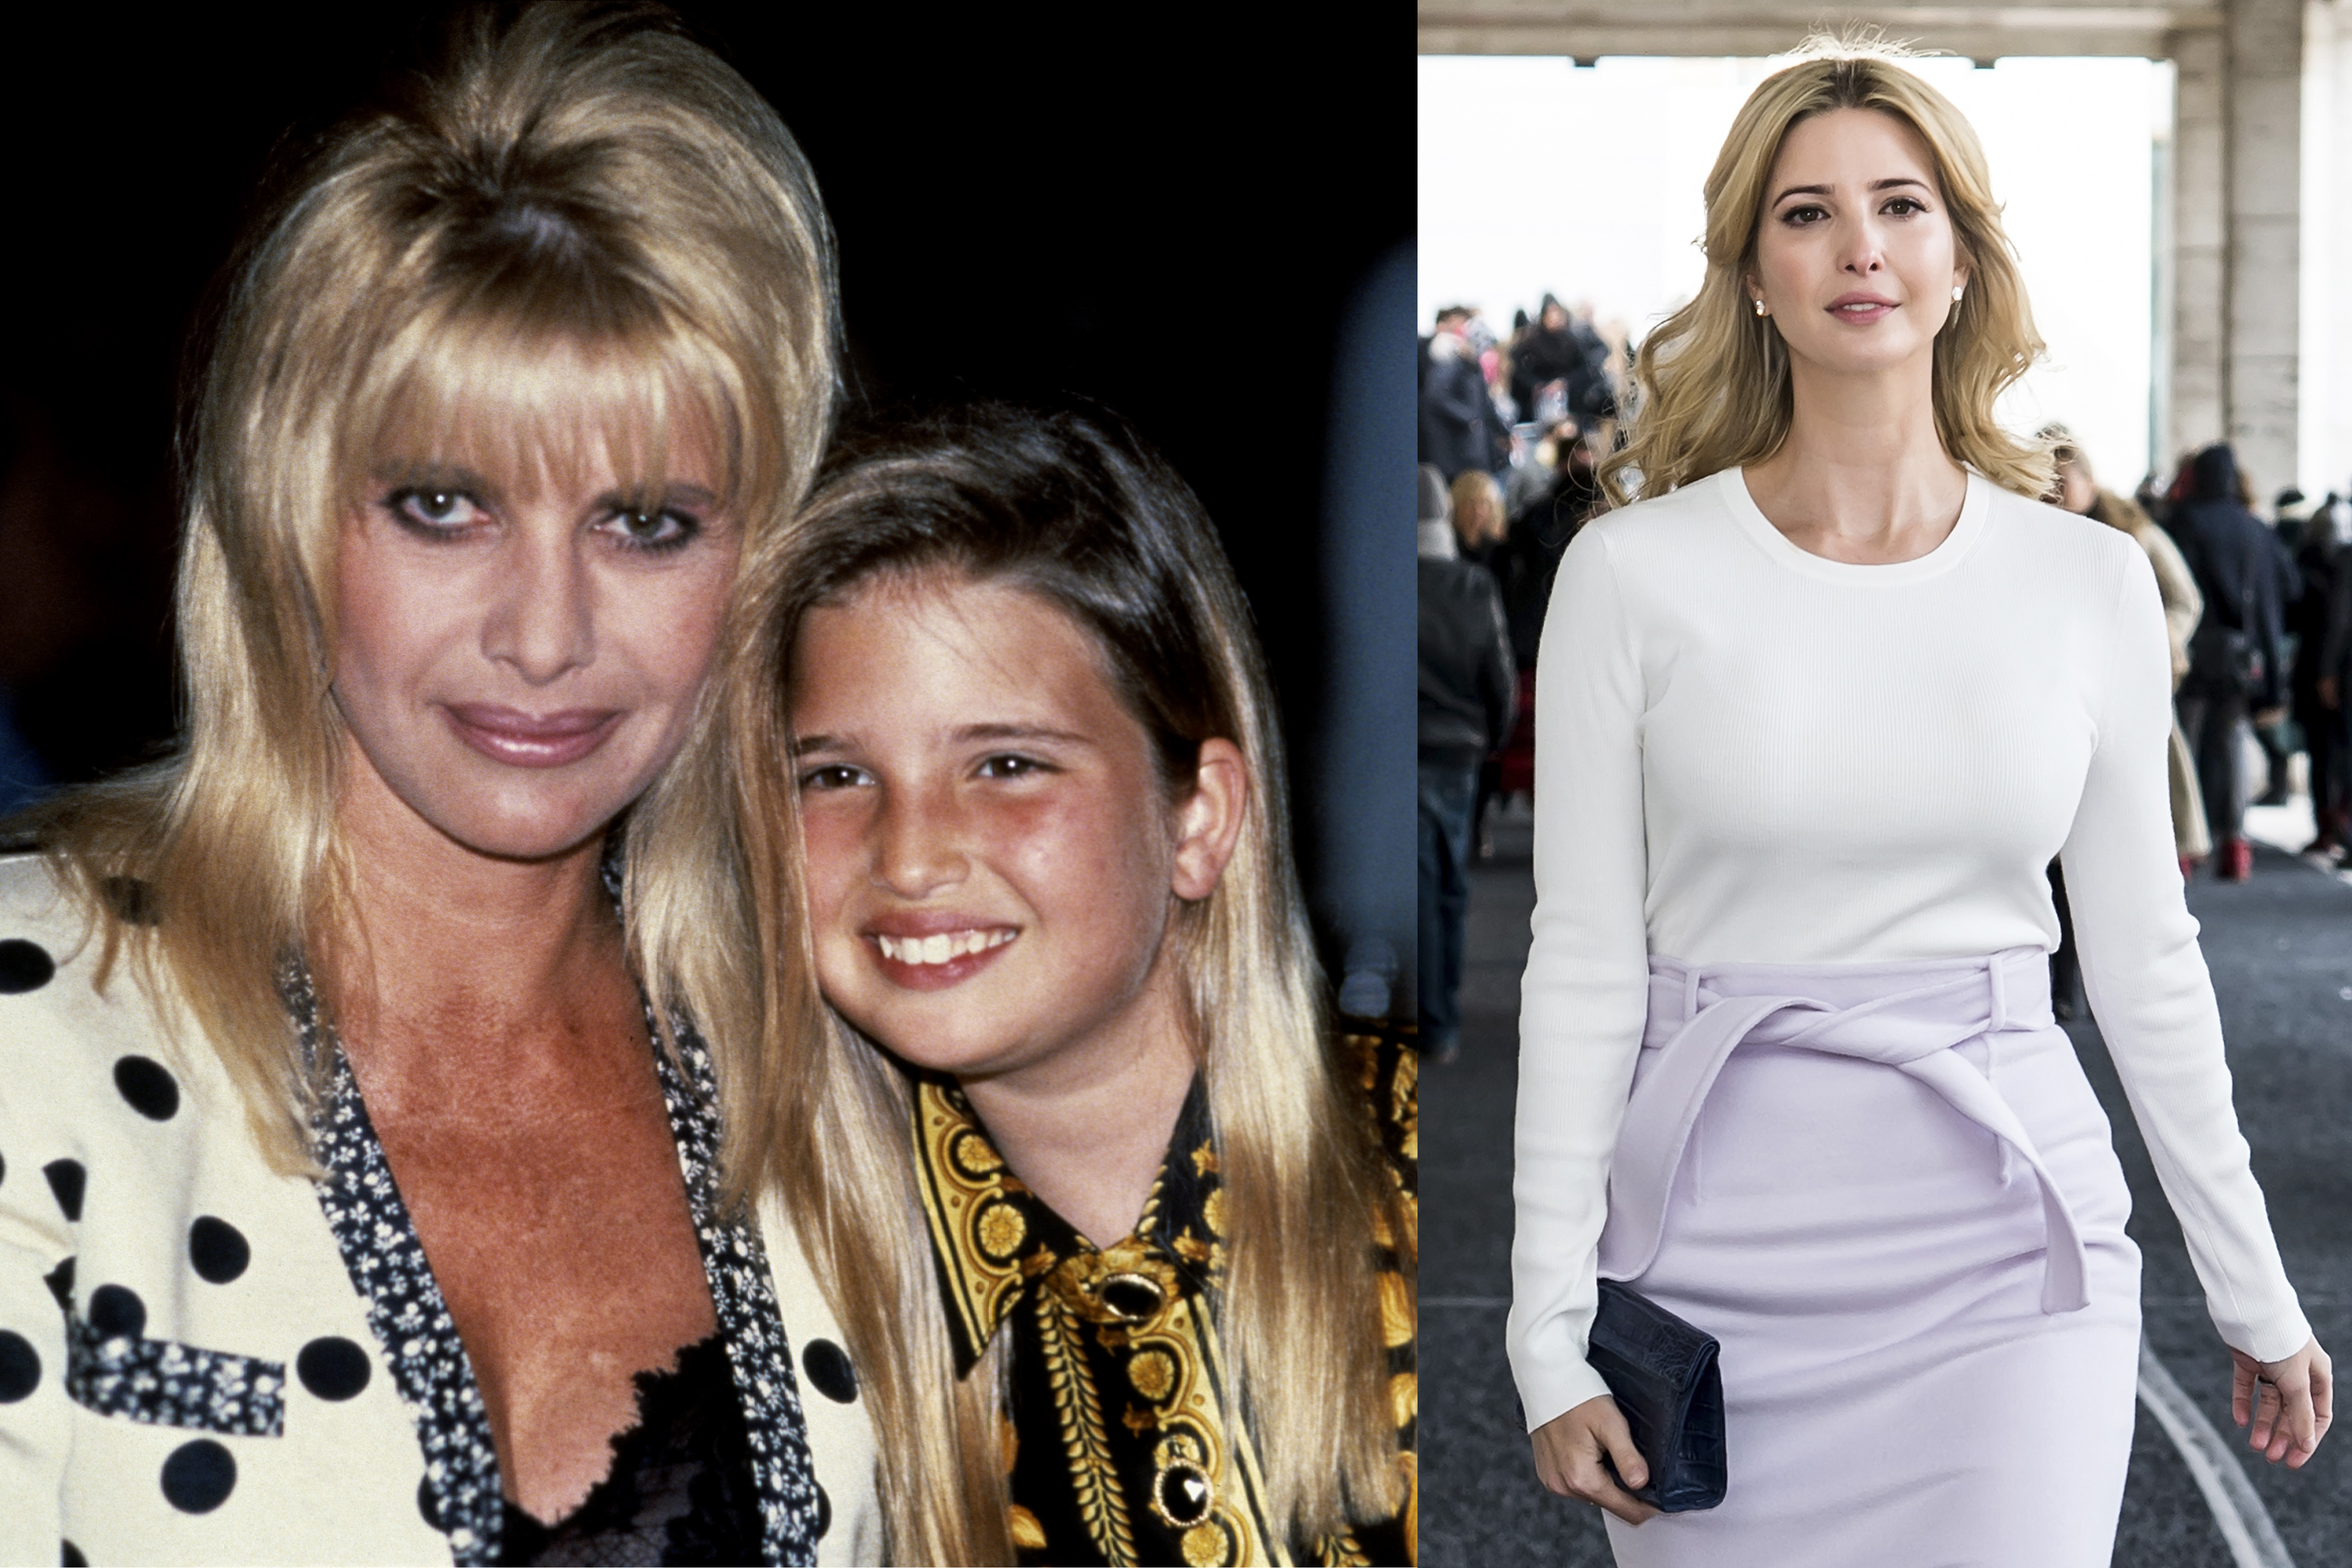 Left: Ivanka Trump with her mother, Ivana, in 1992; Right: Ivanka in New York City in February 2015.